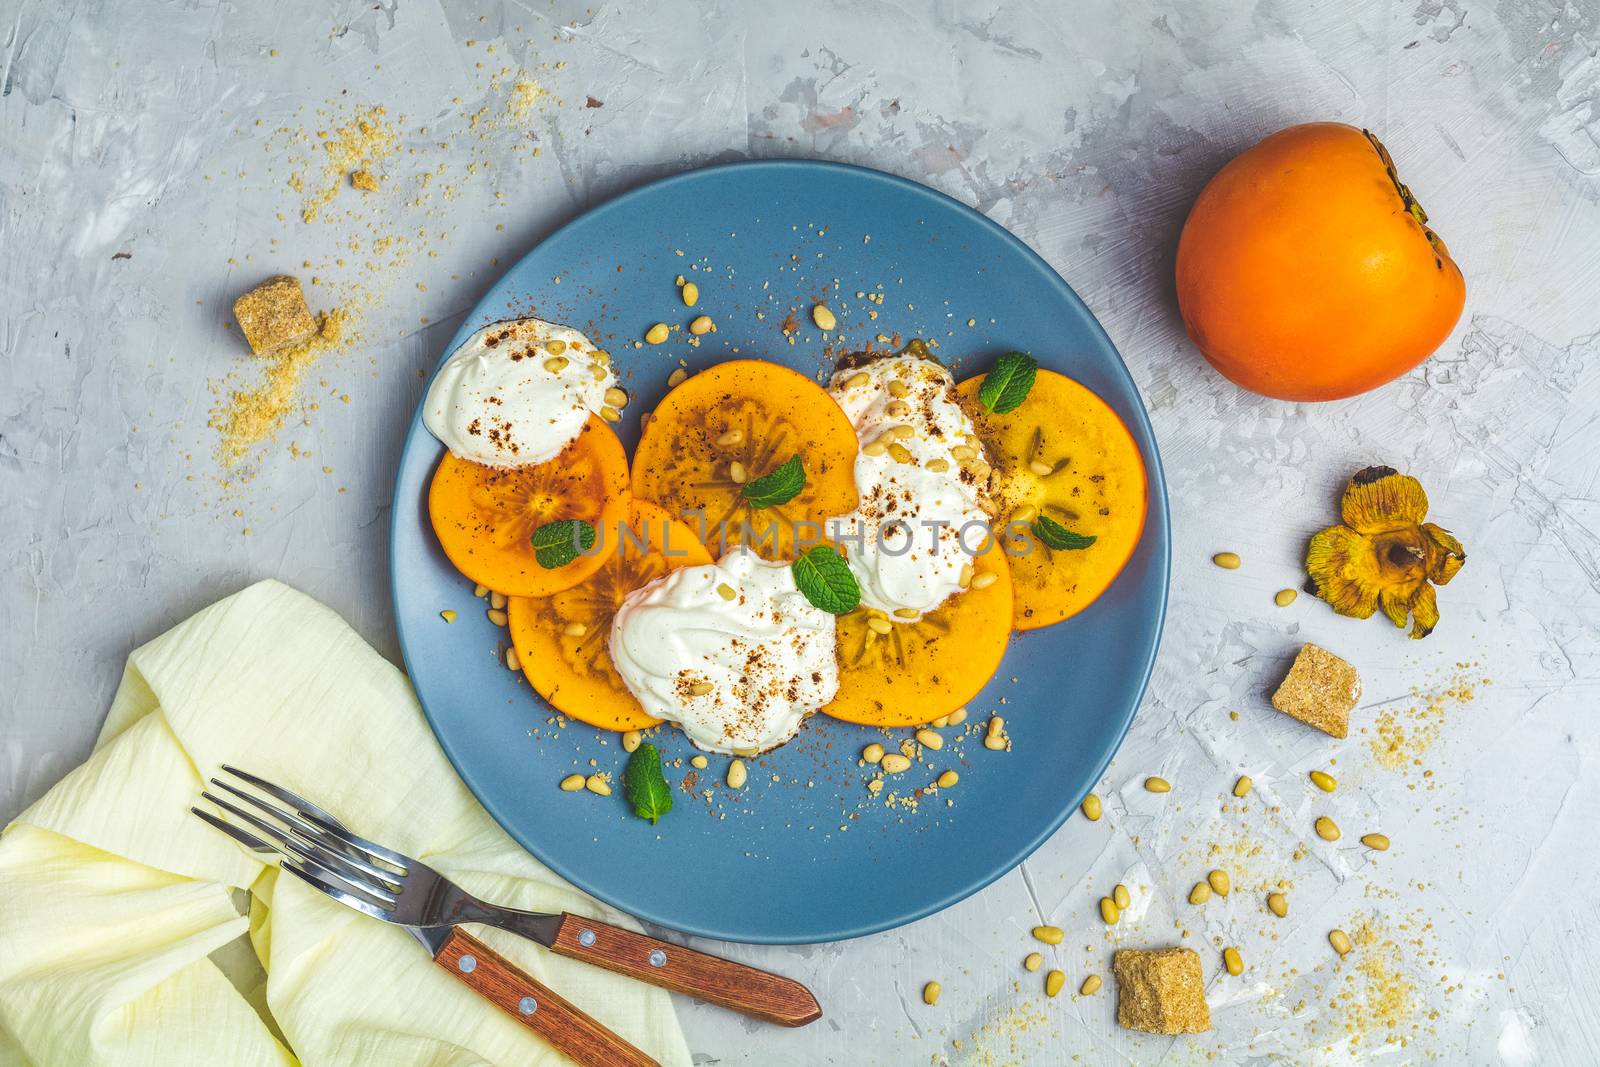 Delicious healthy fruit breakfast. Sliced persimmon with yogurt, brown sugar, pine nuts and fresh mint in blue plate on light gray concrete table surface background, top view, flat lay.